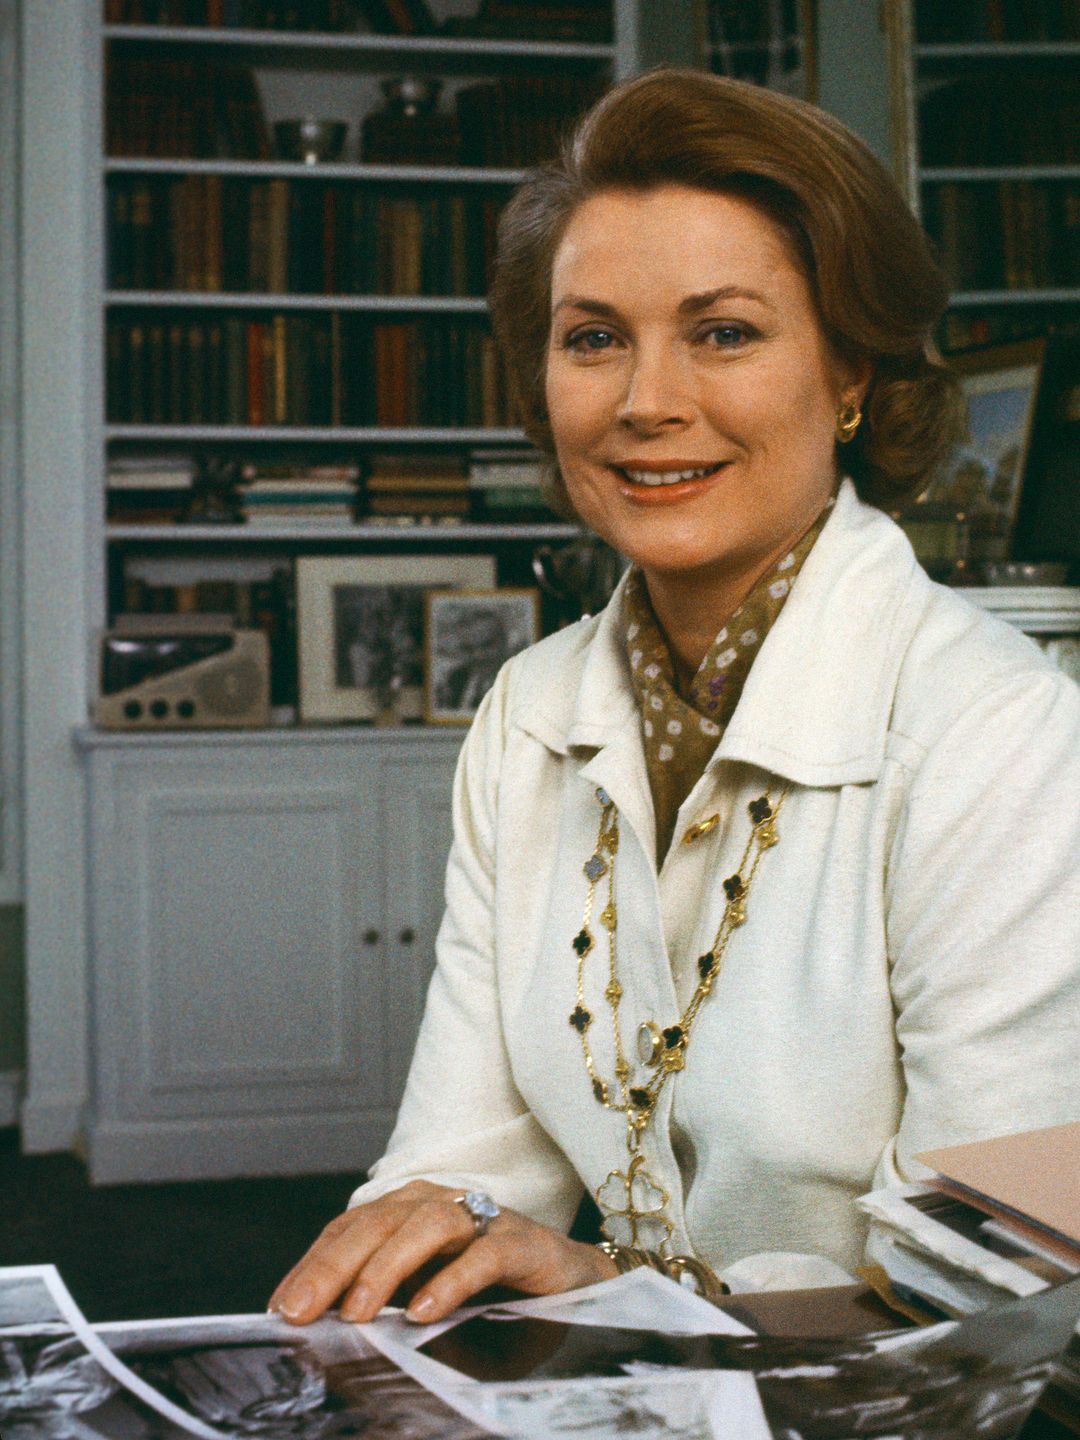 Princess Grace Kelly at her office in the Prince's Palace in Monte Carlo, Monaco wearing her Alhambra necklaces